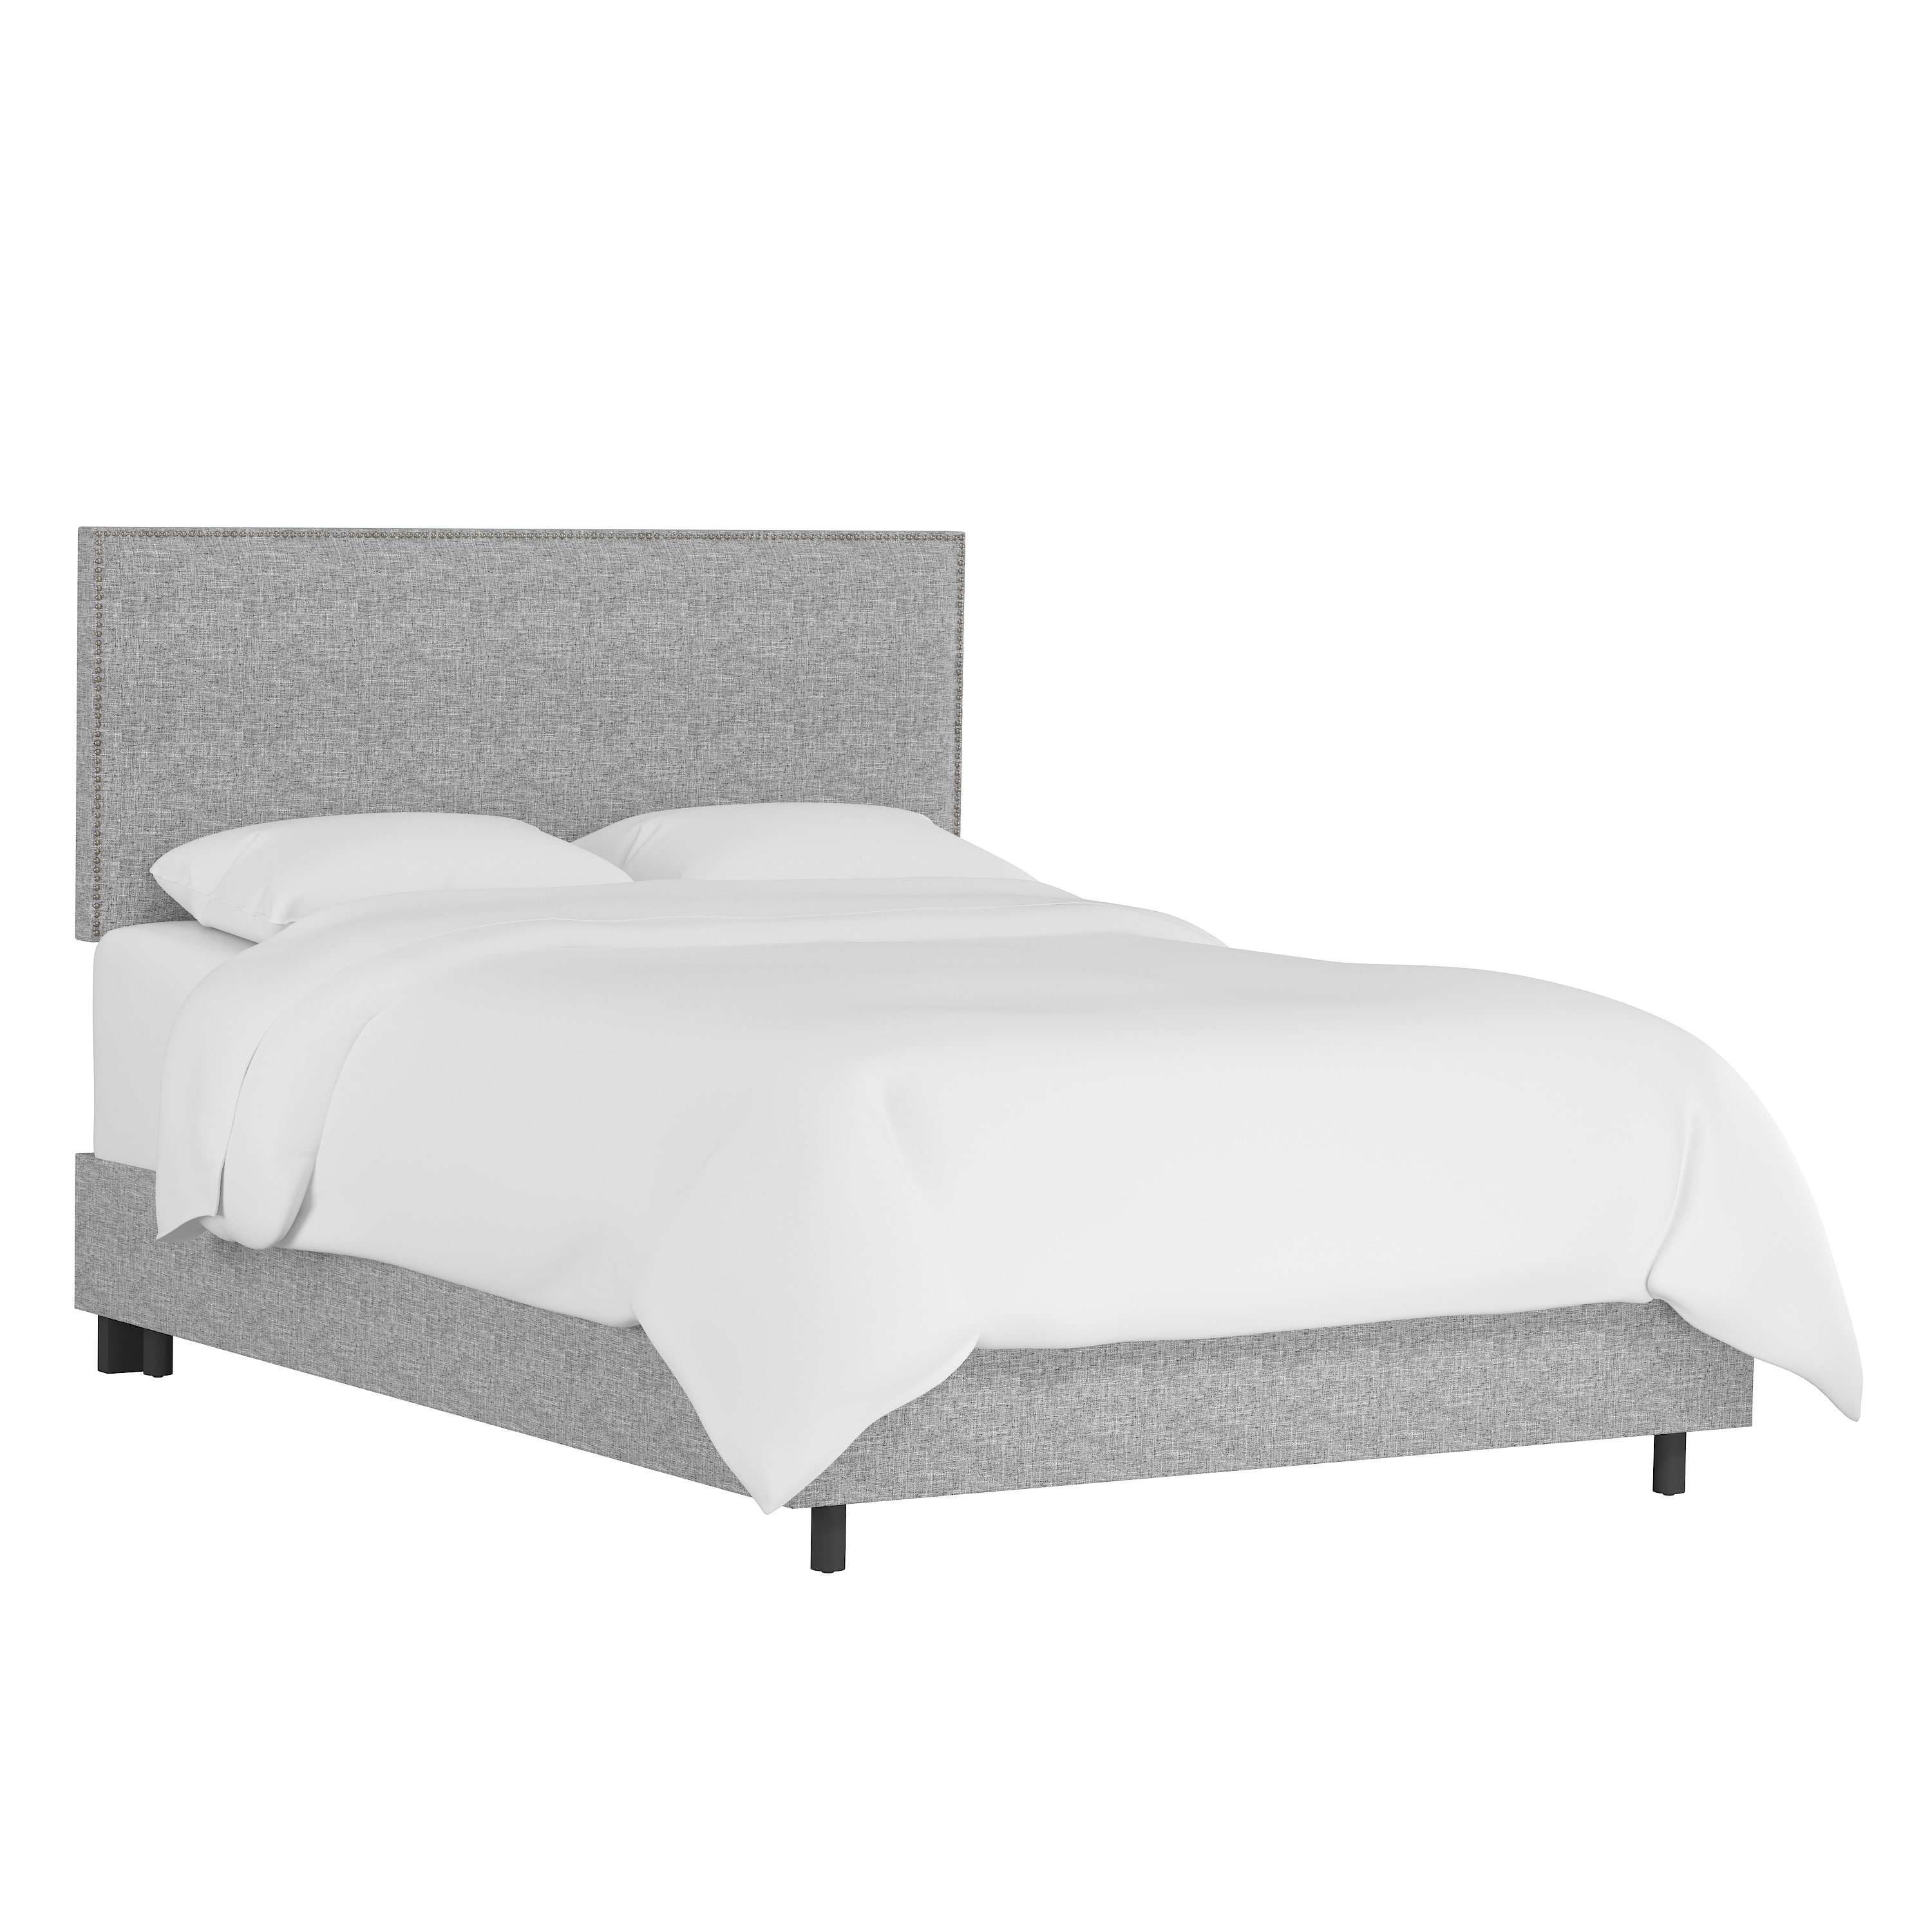 Ellsworth Bed, Queen, Pumice, Pewter Nailheads - Image 0